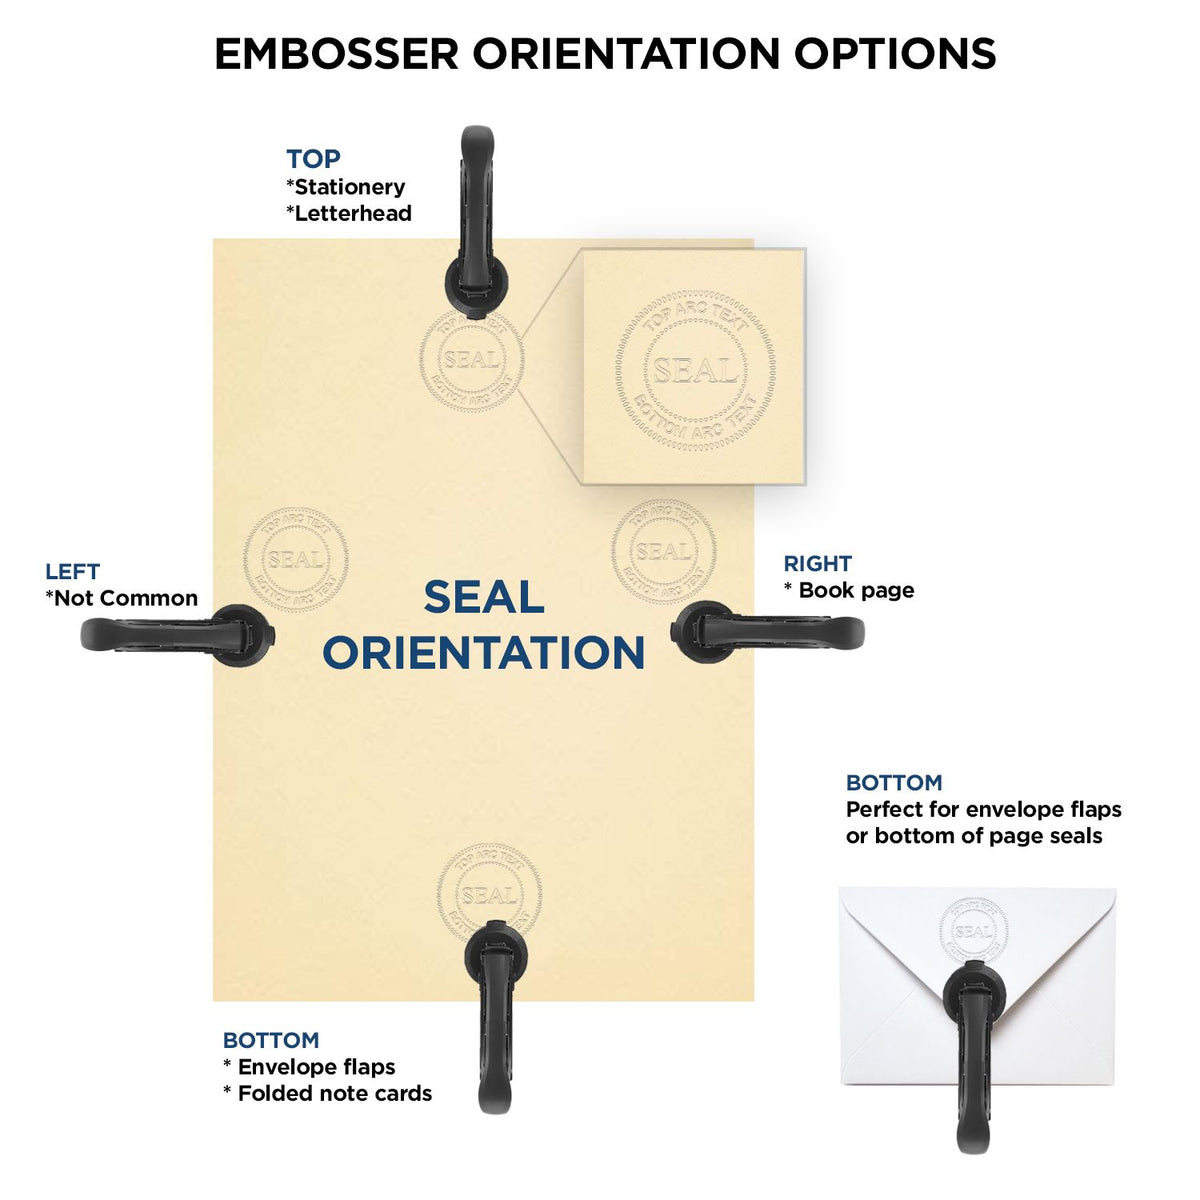 An infographic for the New Mexico Geologist Desk Seal showing embosser orientation, this is showing examples of a top, bottom, right and left insert.